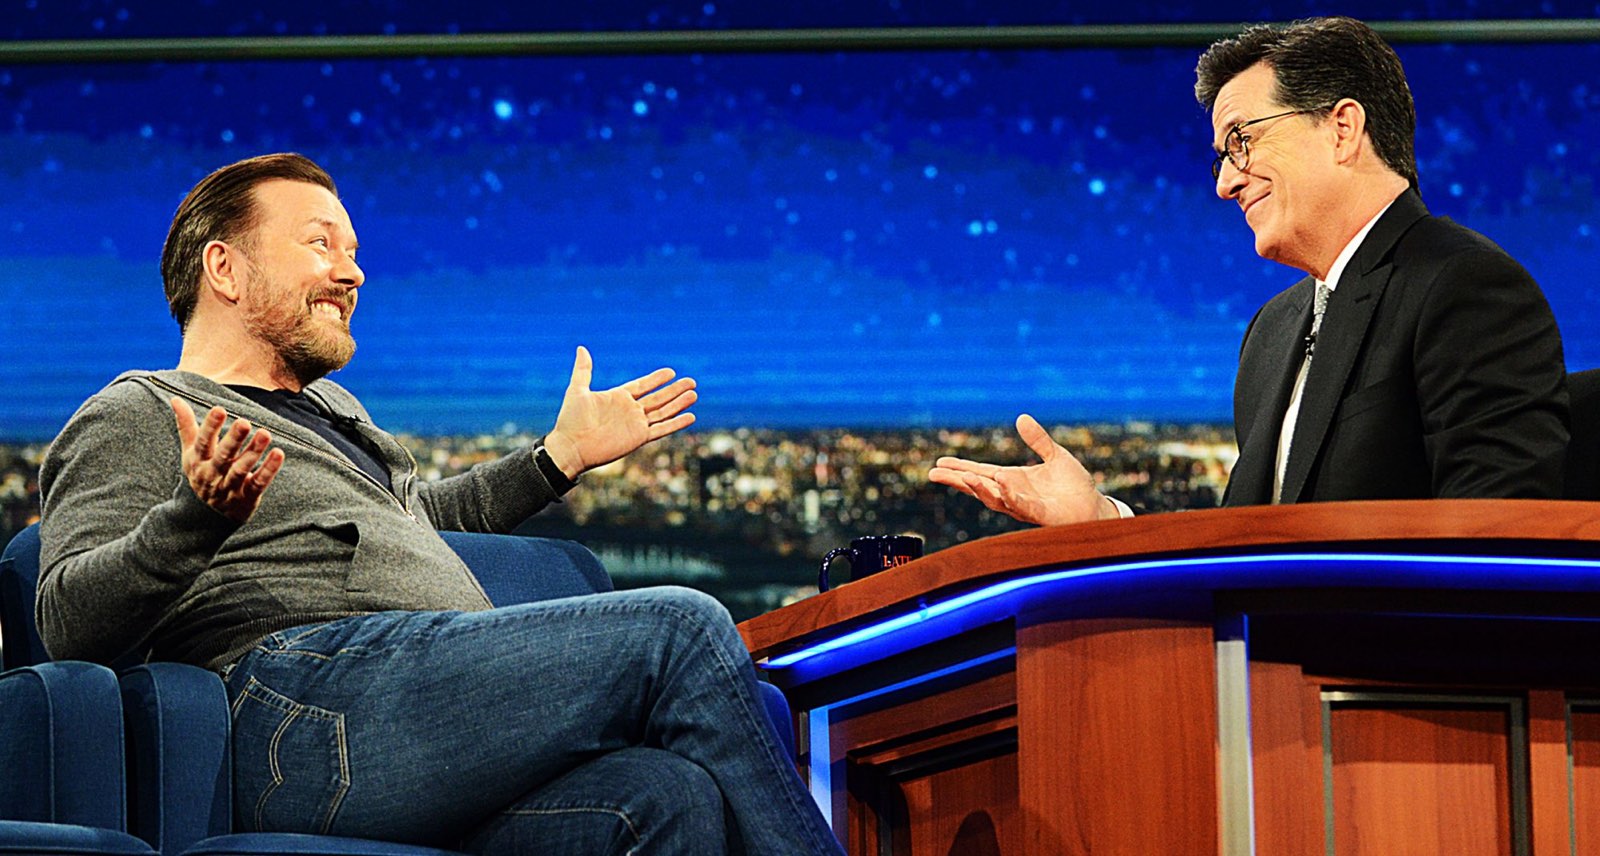 Ricky Gervais and Stephen Colbert debate the existence of God